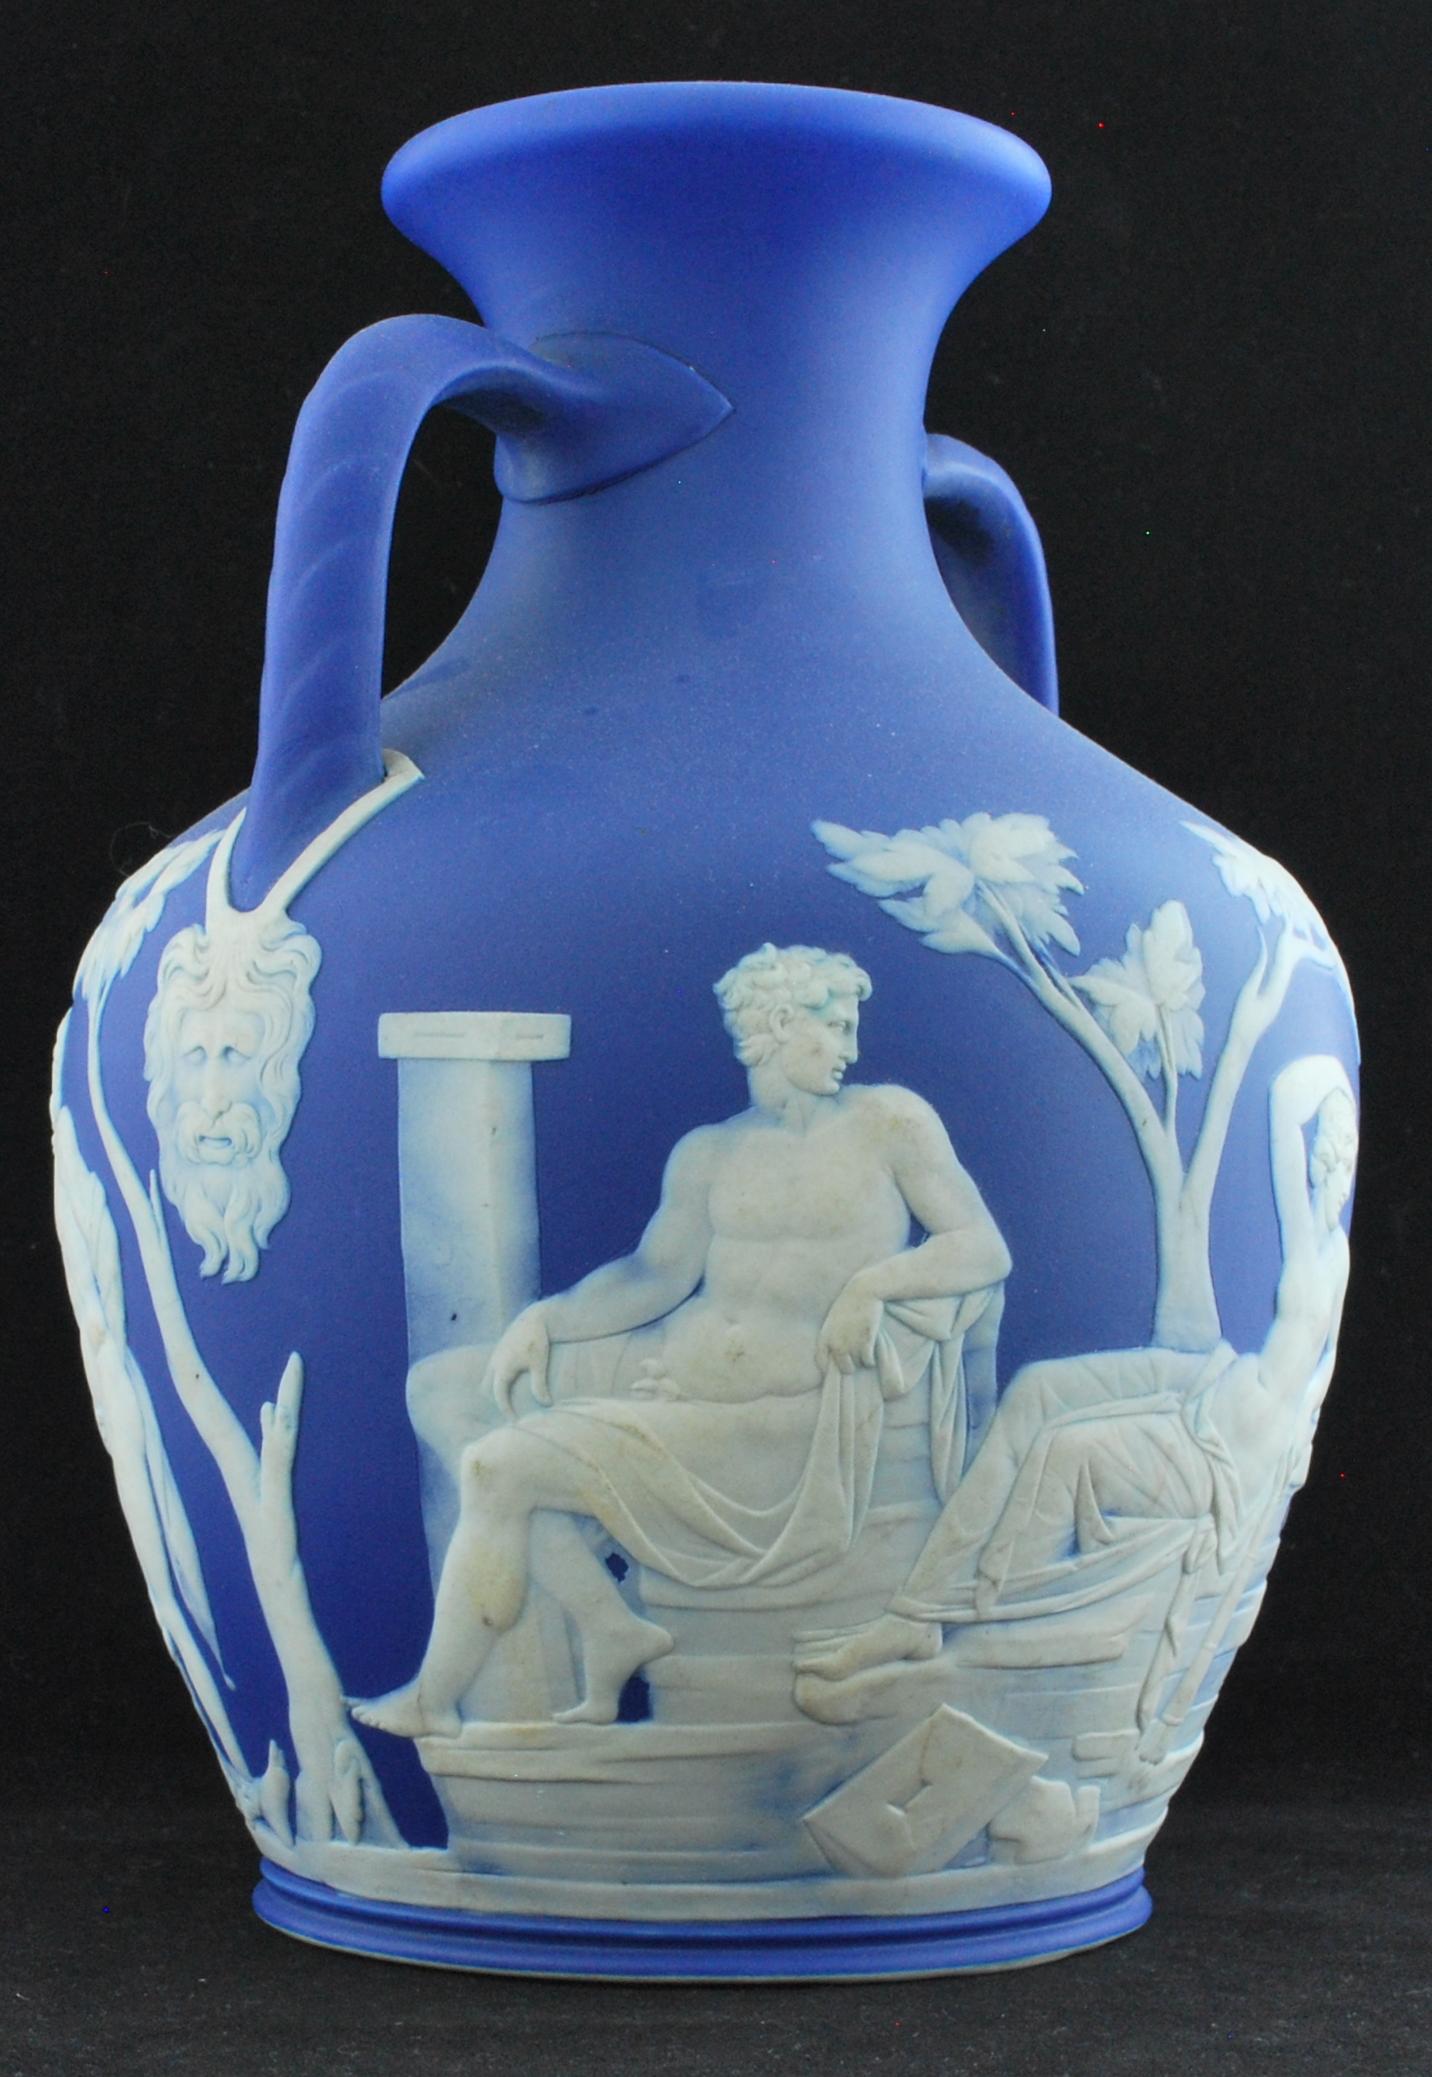 A full-sized Portland vase in cobalt jasper dip. This is the 'undraped' version, meaning it follows the original, rather than having draperies strategically placed. 

A superb example, with really good translucence. At this time, large jasper